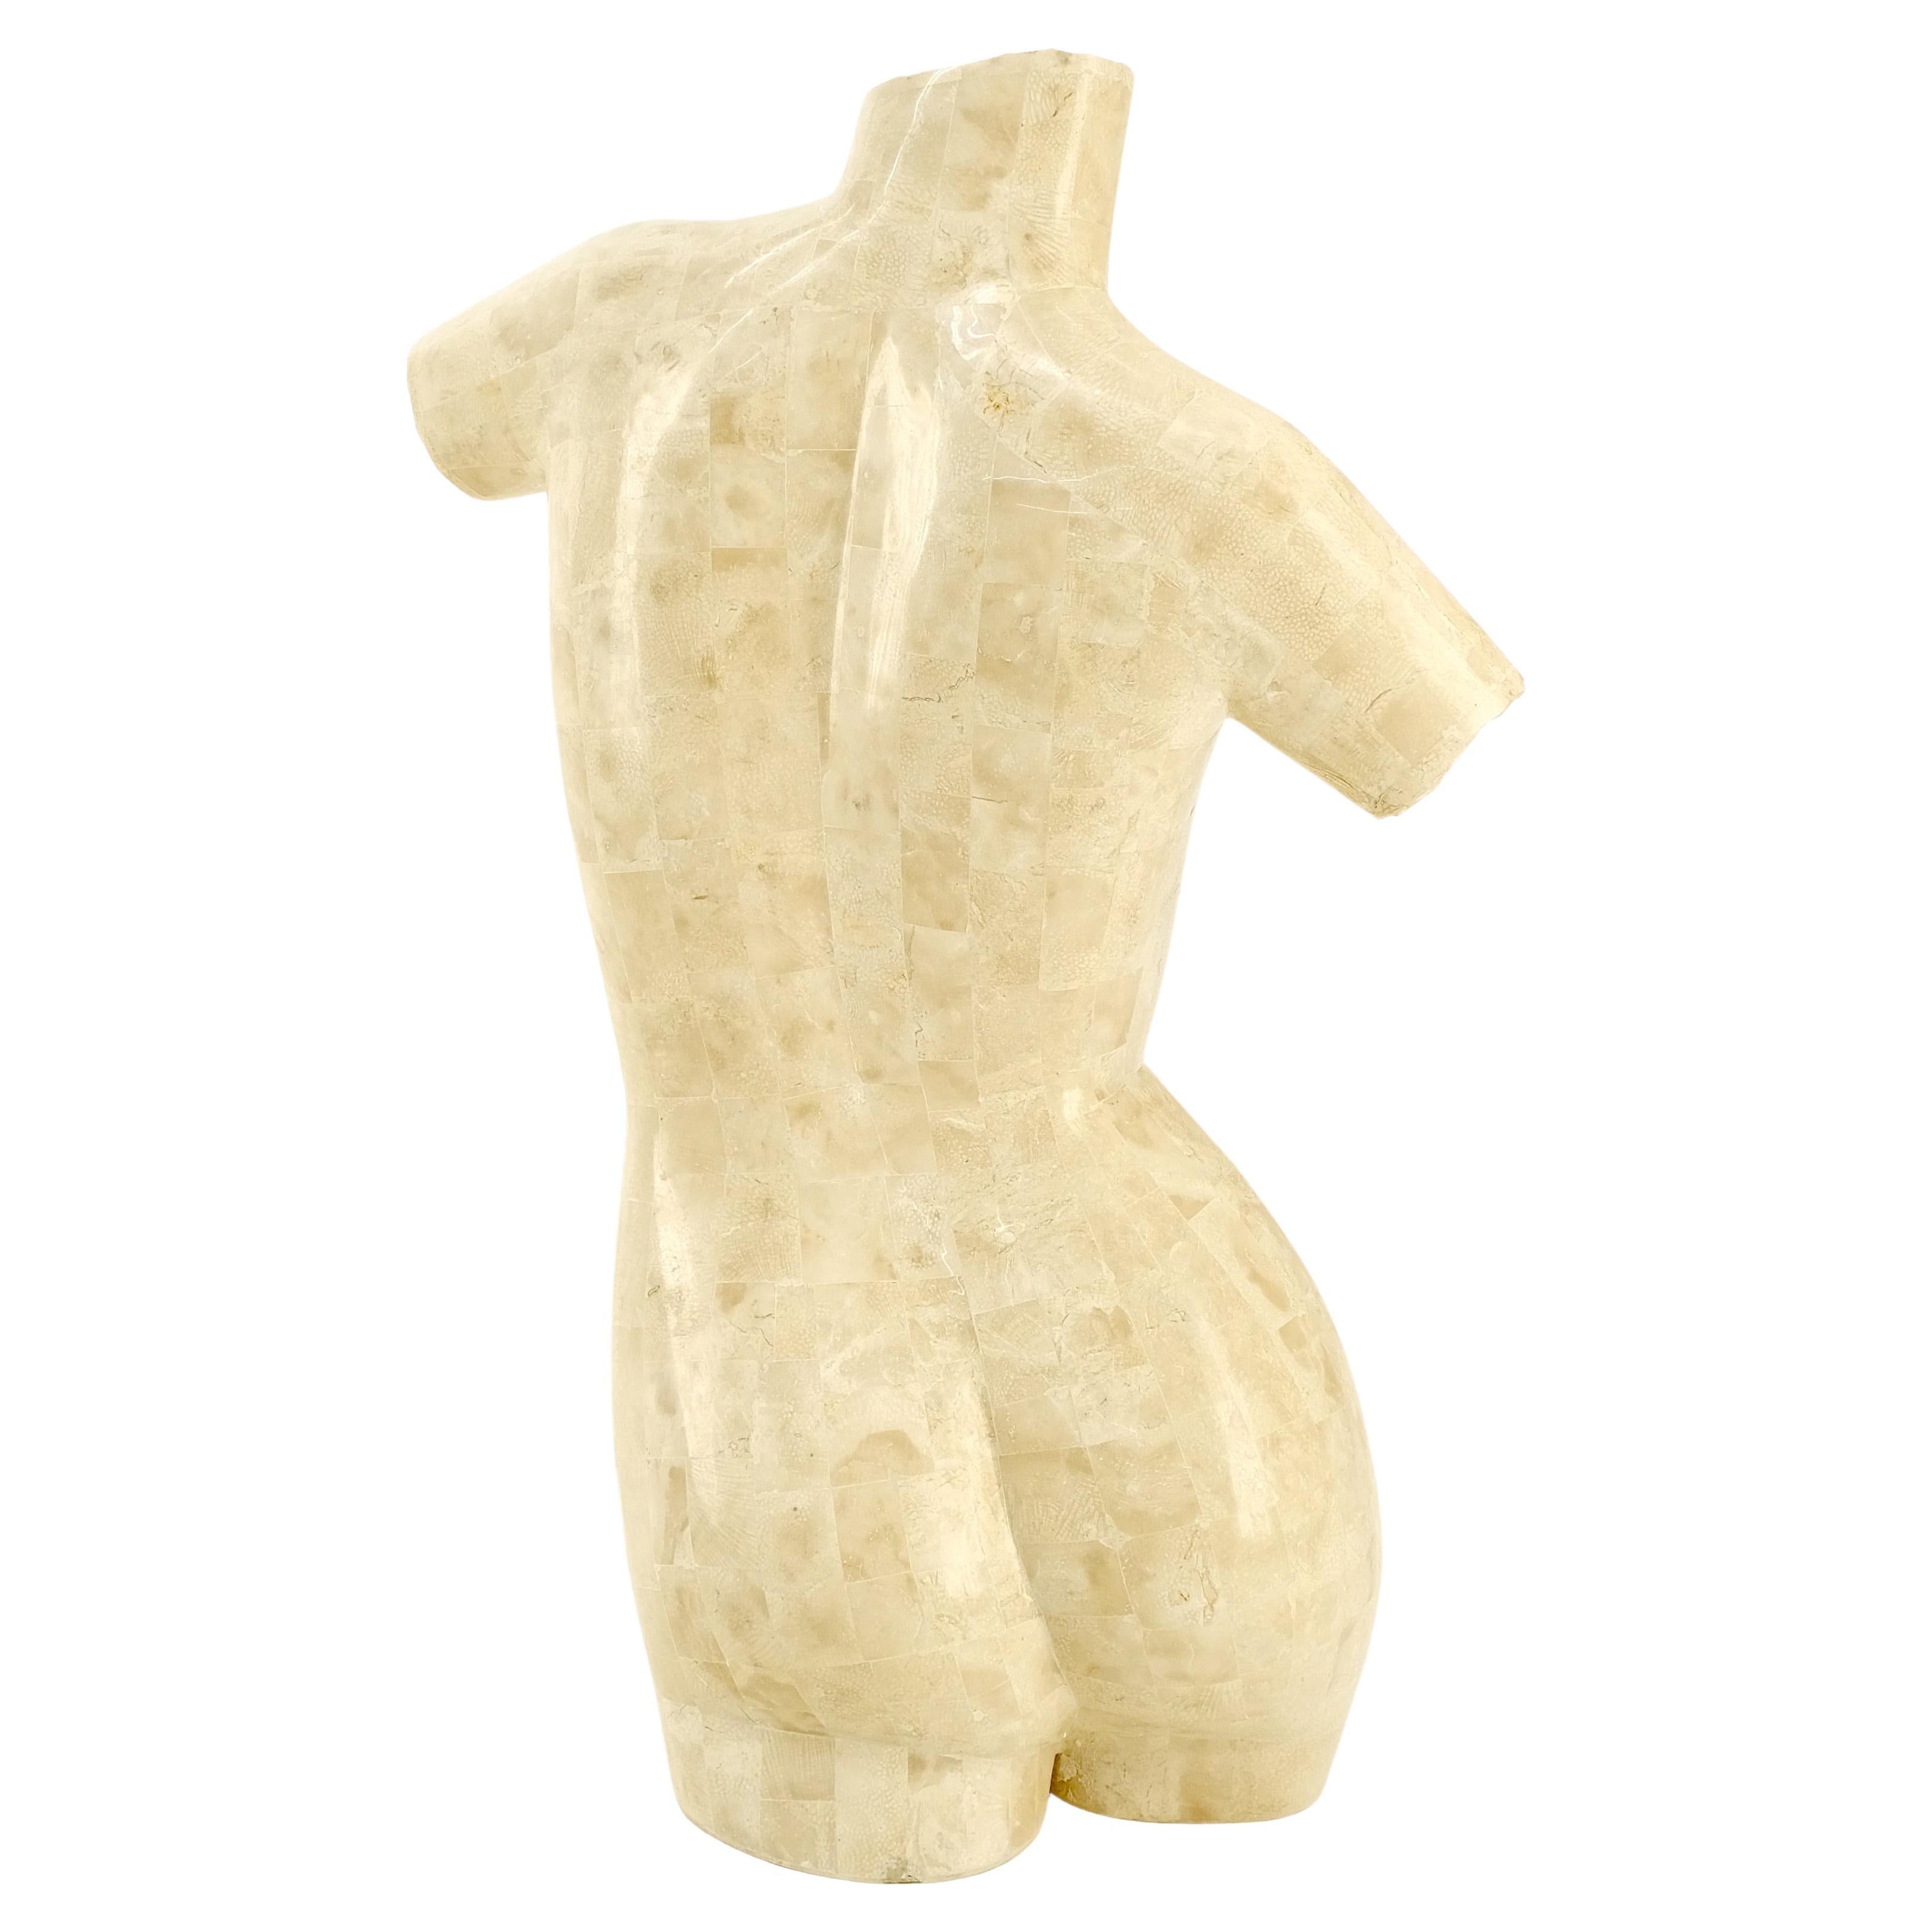 Tessellated Stone Marble Travertine Sculpture of Nude Female Torso Mint! In Good Condition For Sale In Rockaway, NJ